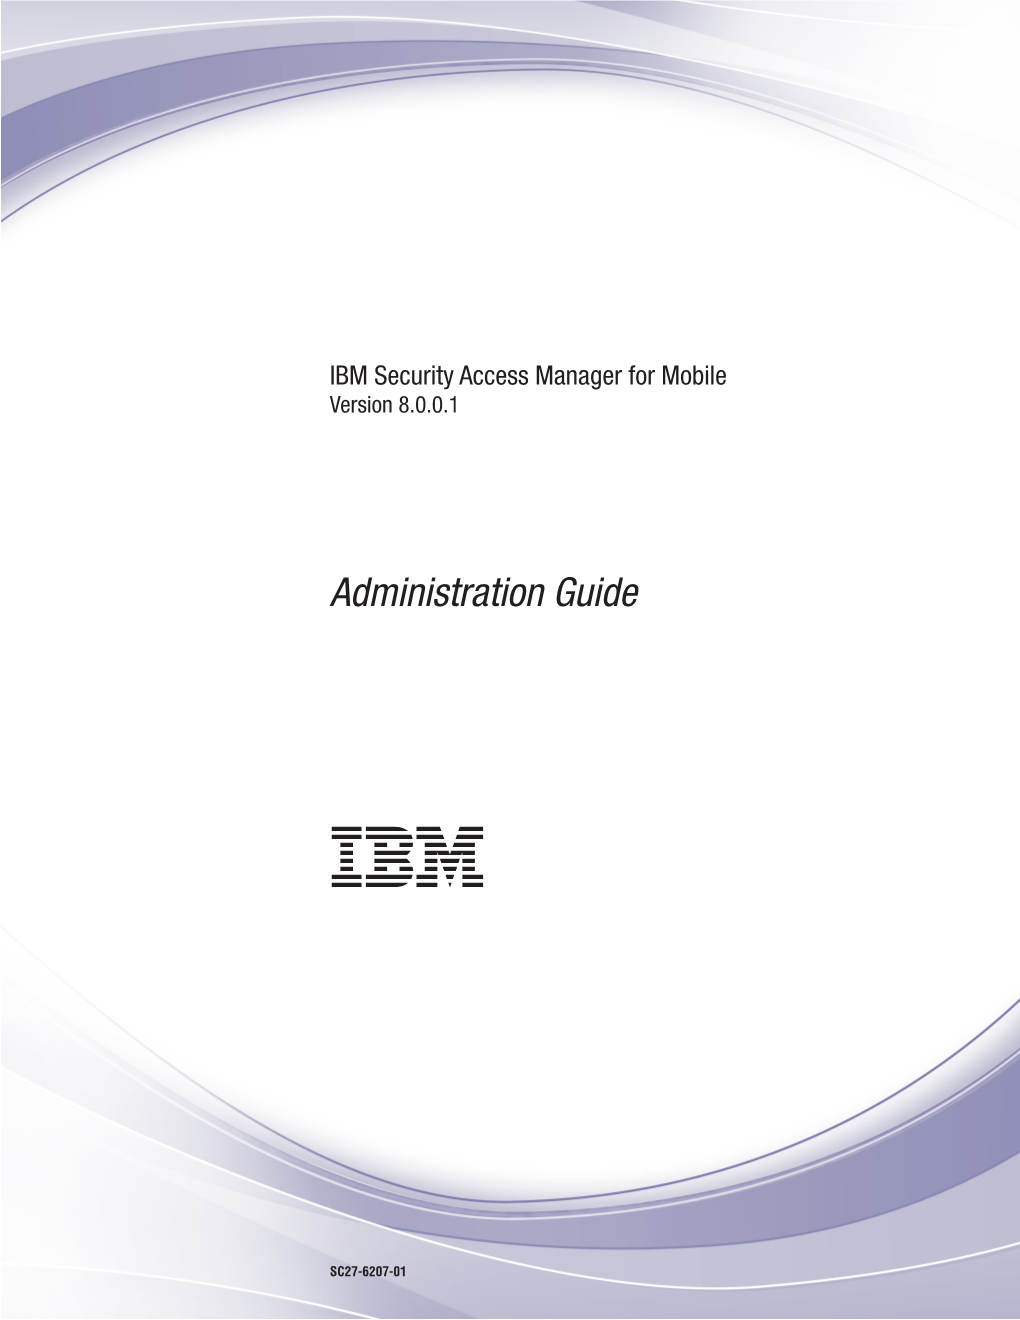 IBM Security Access Manager for Mobile: Administration Guide Figures